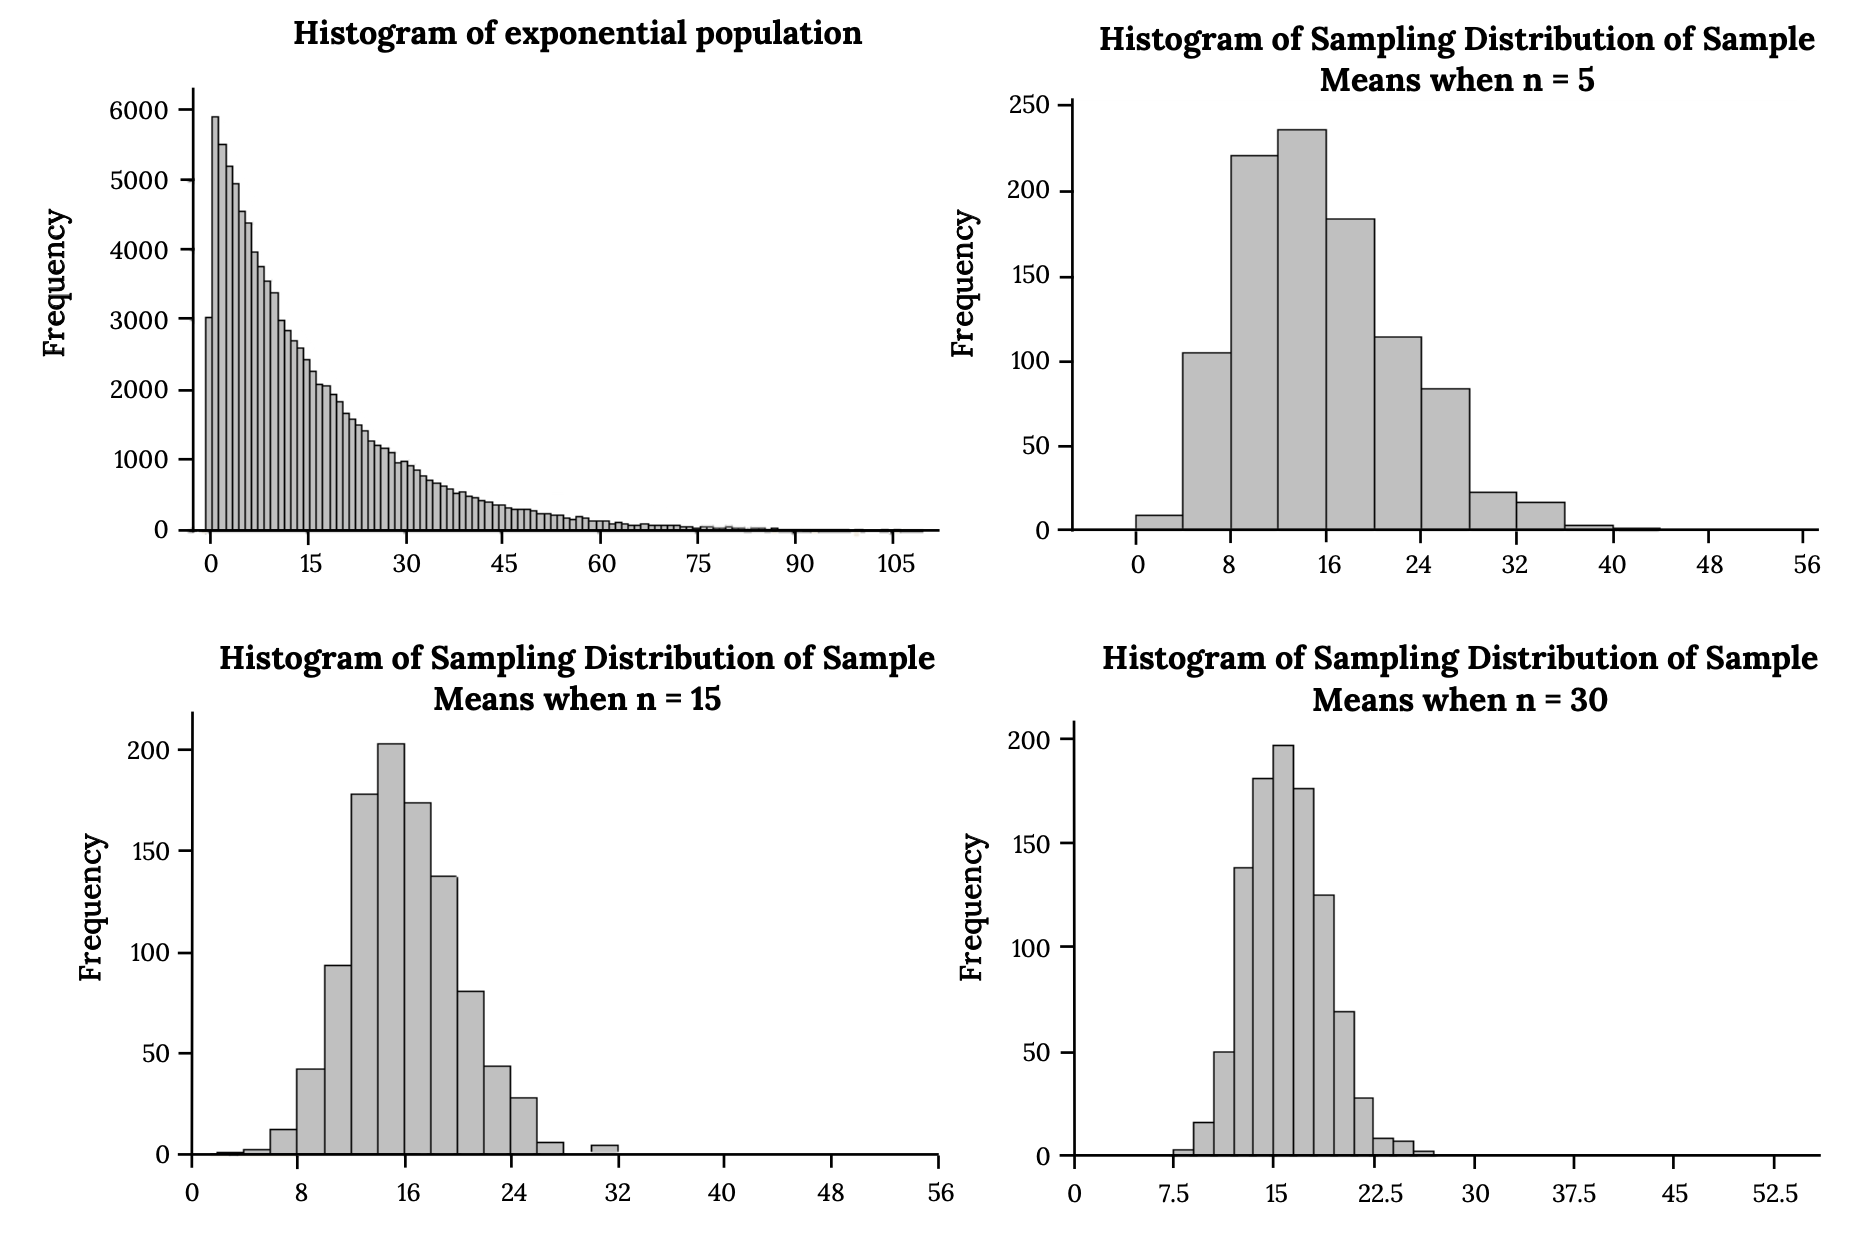 Four histograms. Top left - Histogram of exponential population; Top right - Histogram of Sampling Distribution of Sample Means when n = 5; Bottom left - Histogram of Sampling Distribution of Sample Means when n = 15; Bottom right - Histogram of Sampling Distribution of Sample Means when n = 30. All histograms are skewed right and as n increases, the plot gets more narrow around the mean.